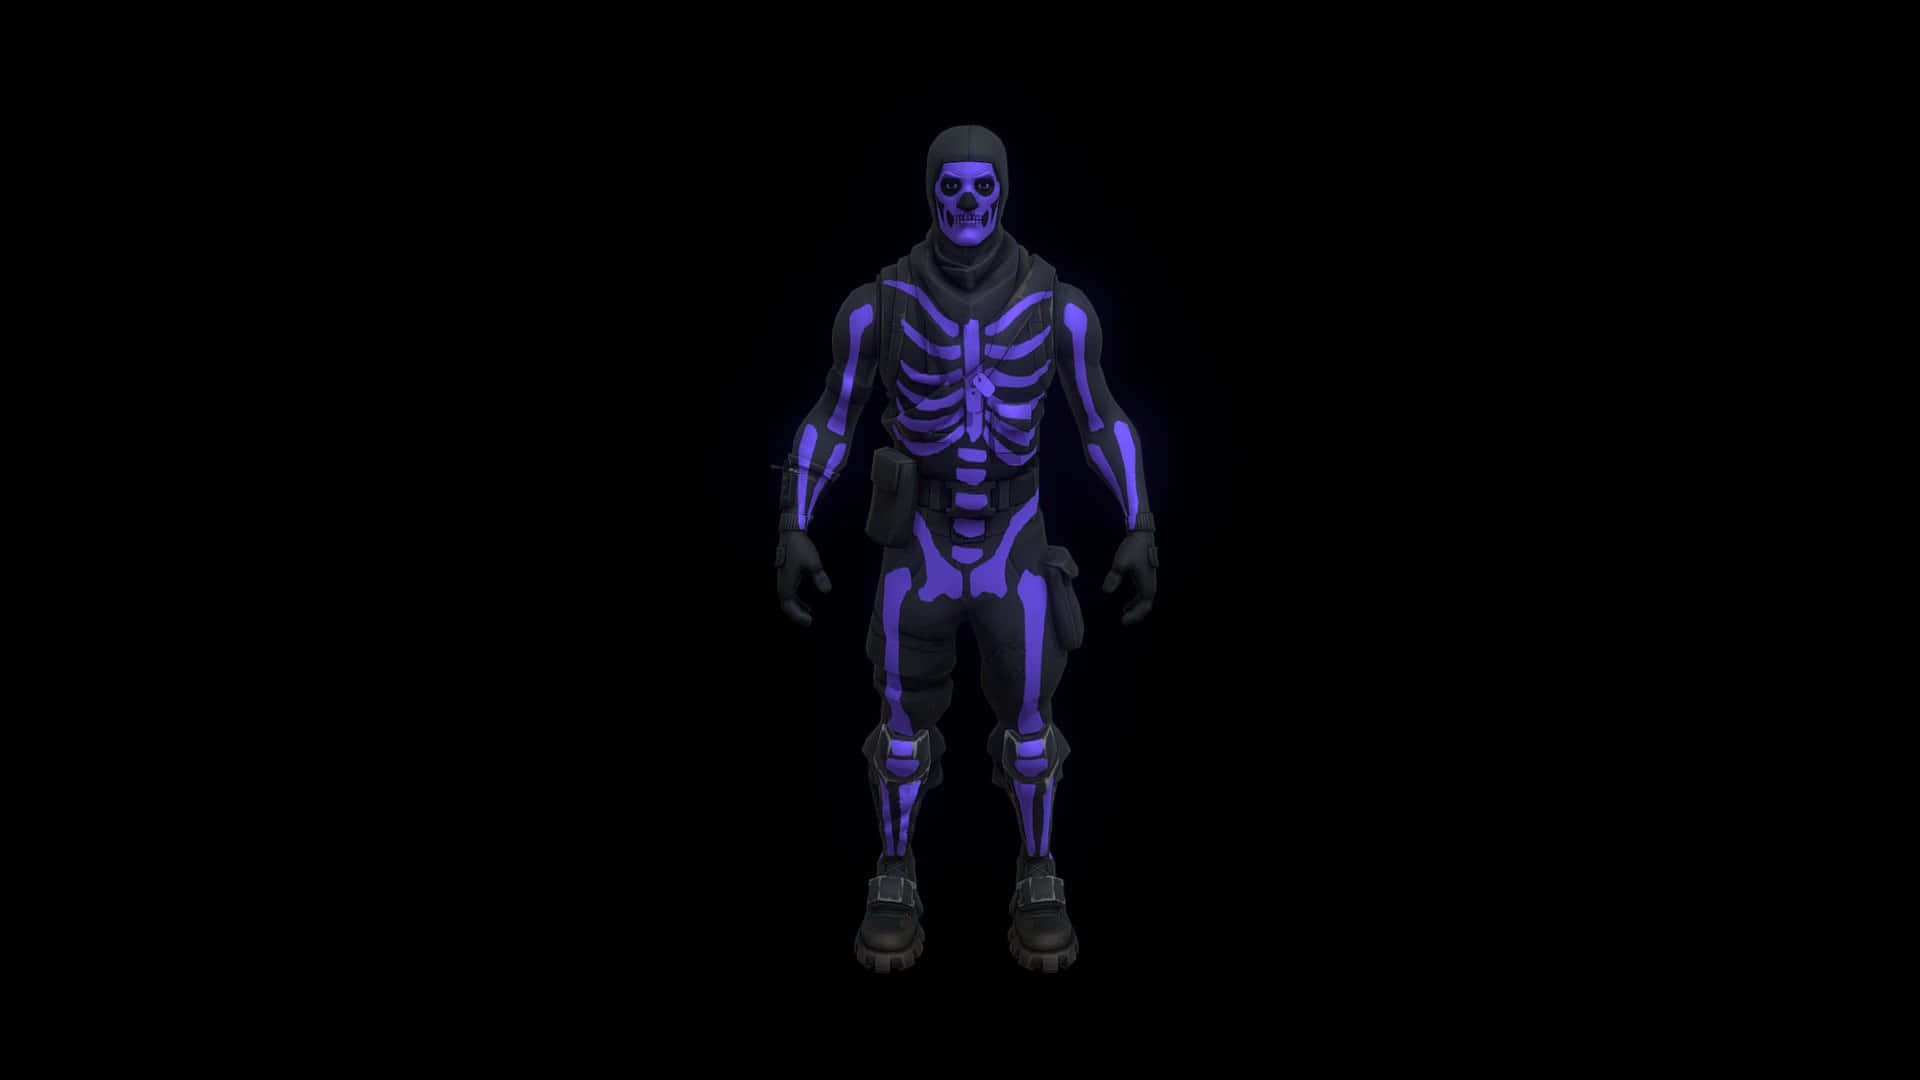 A Skeleton In A Purple Suit Standing On A Black Background Wallpaper